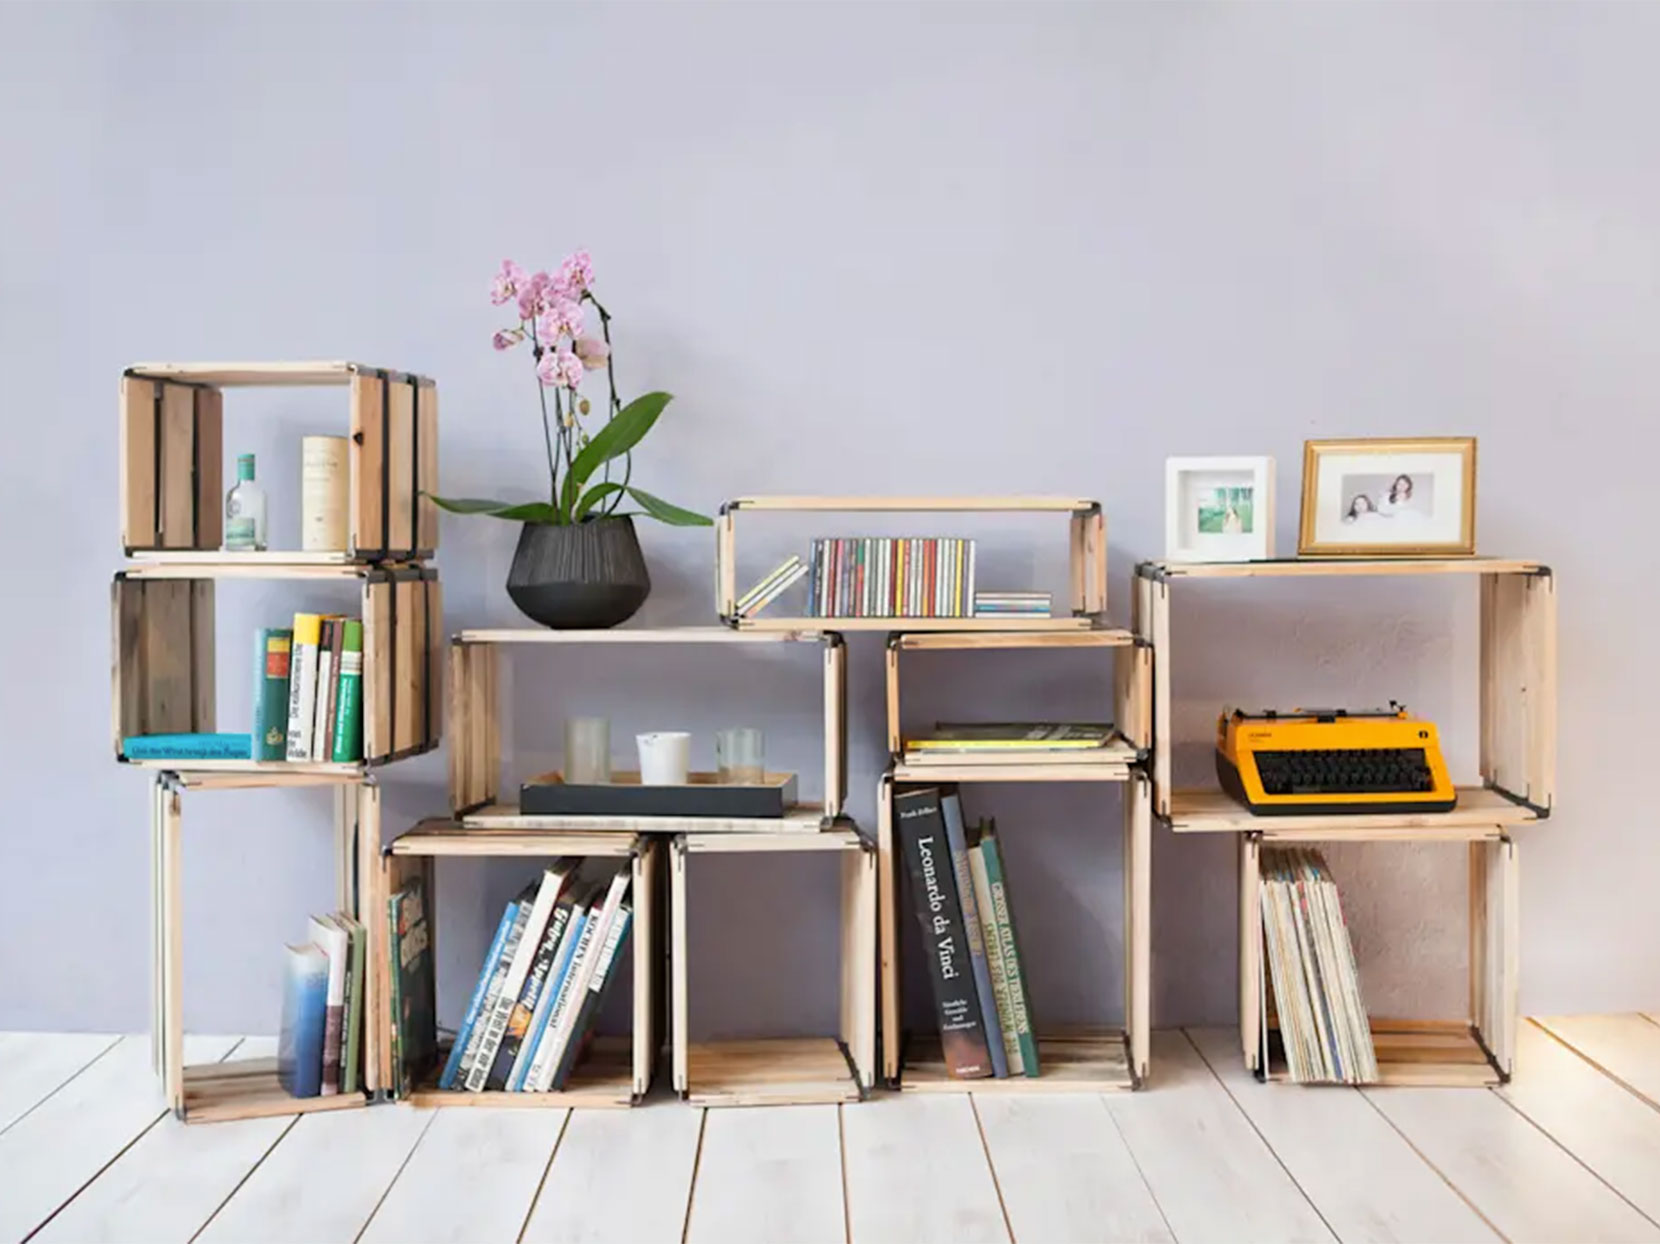 Reditum wooden shelving system with reclaimed wood crates